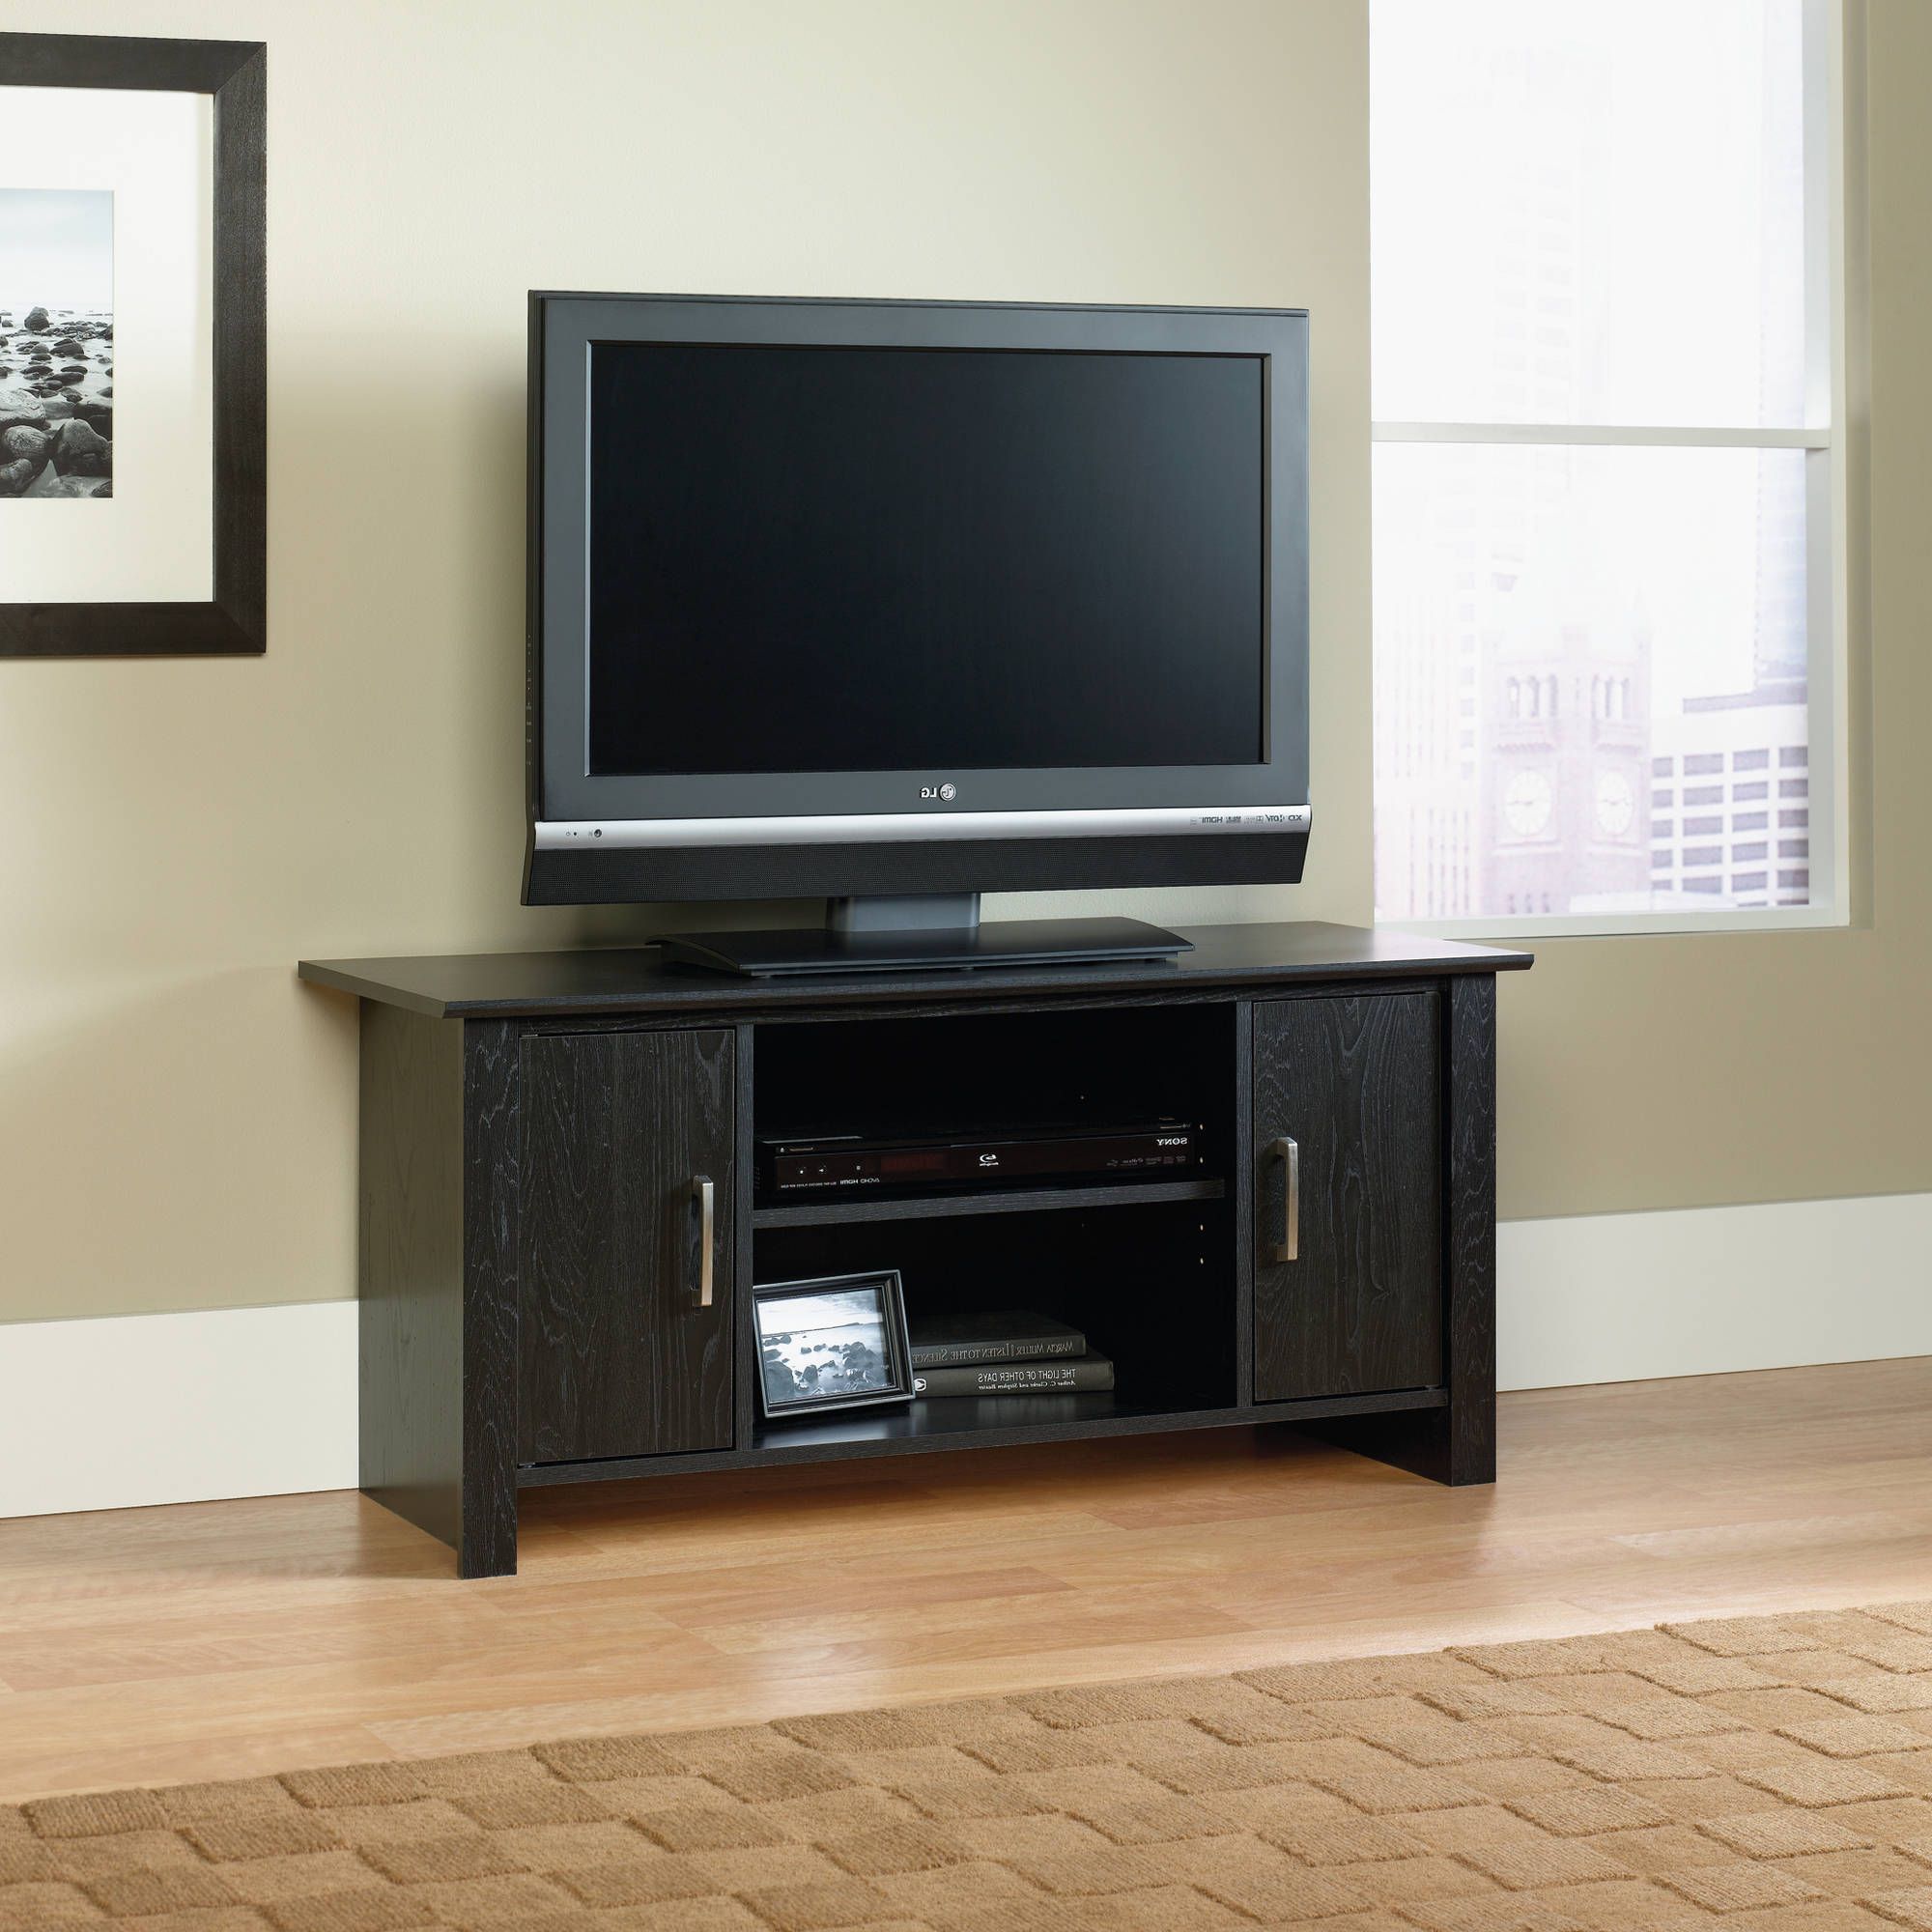 Endearing Furnitech Tv Stand Media Console Together With A Tv Stand Inside Newest Cabinet Tv Stands (View 15 of 20)